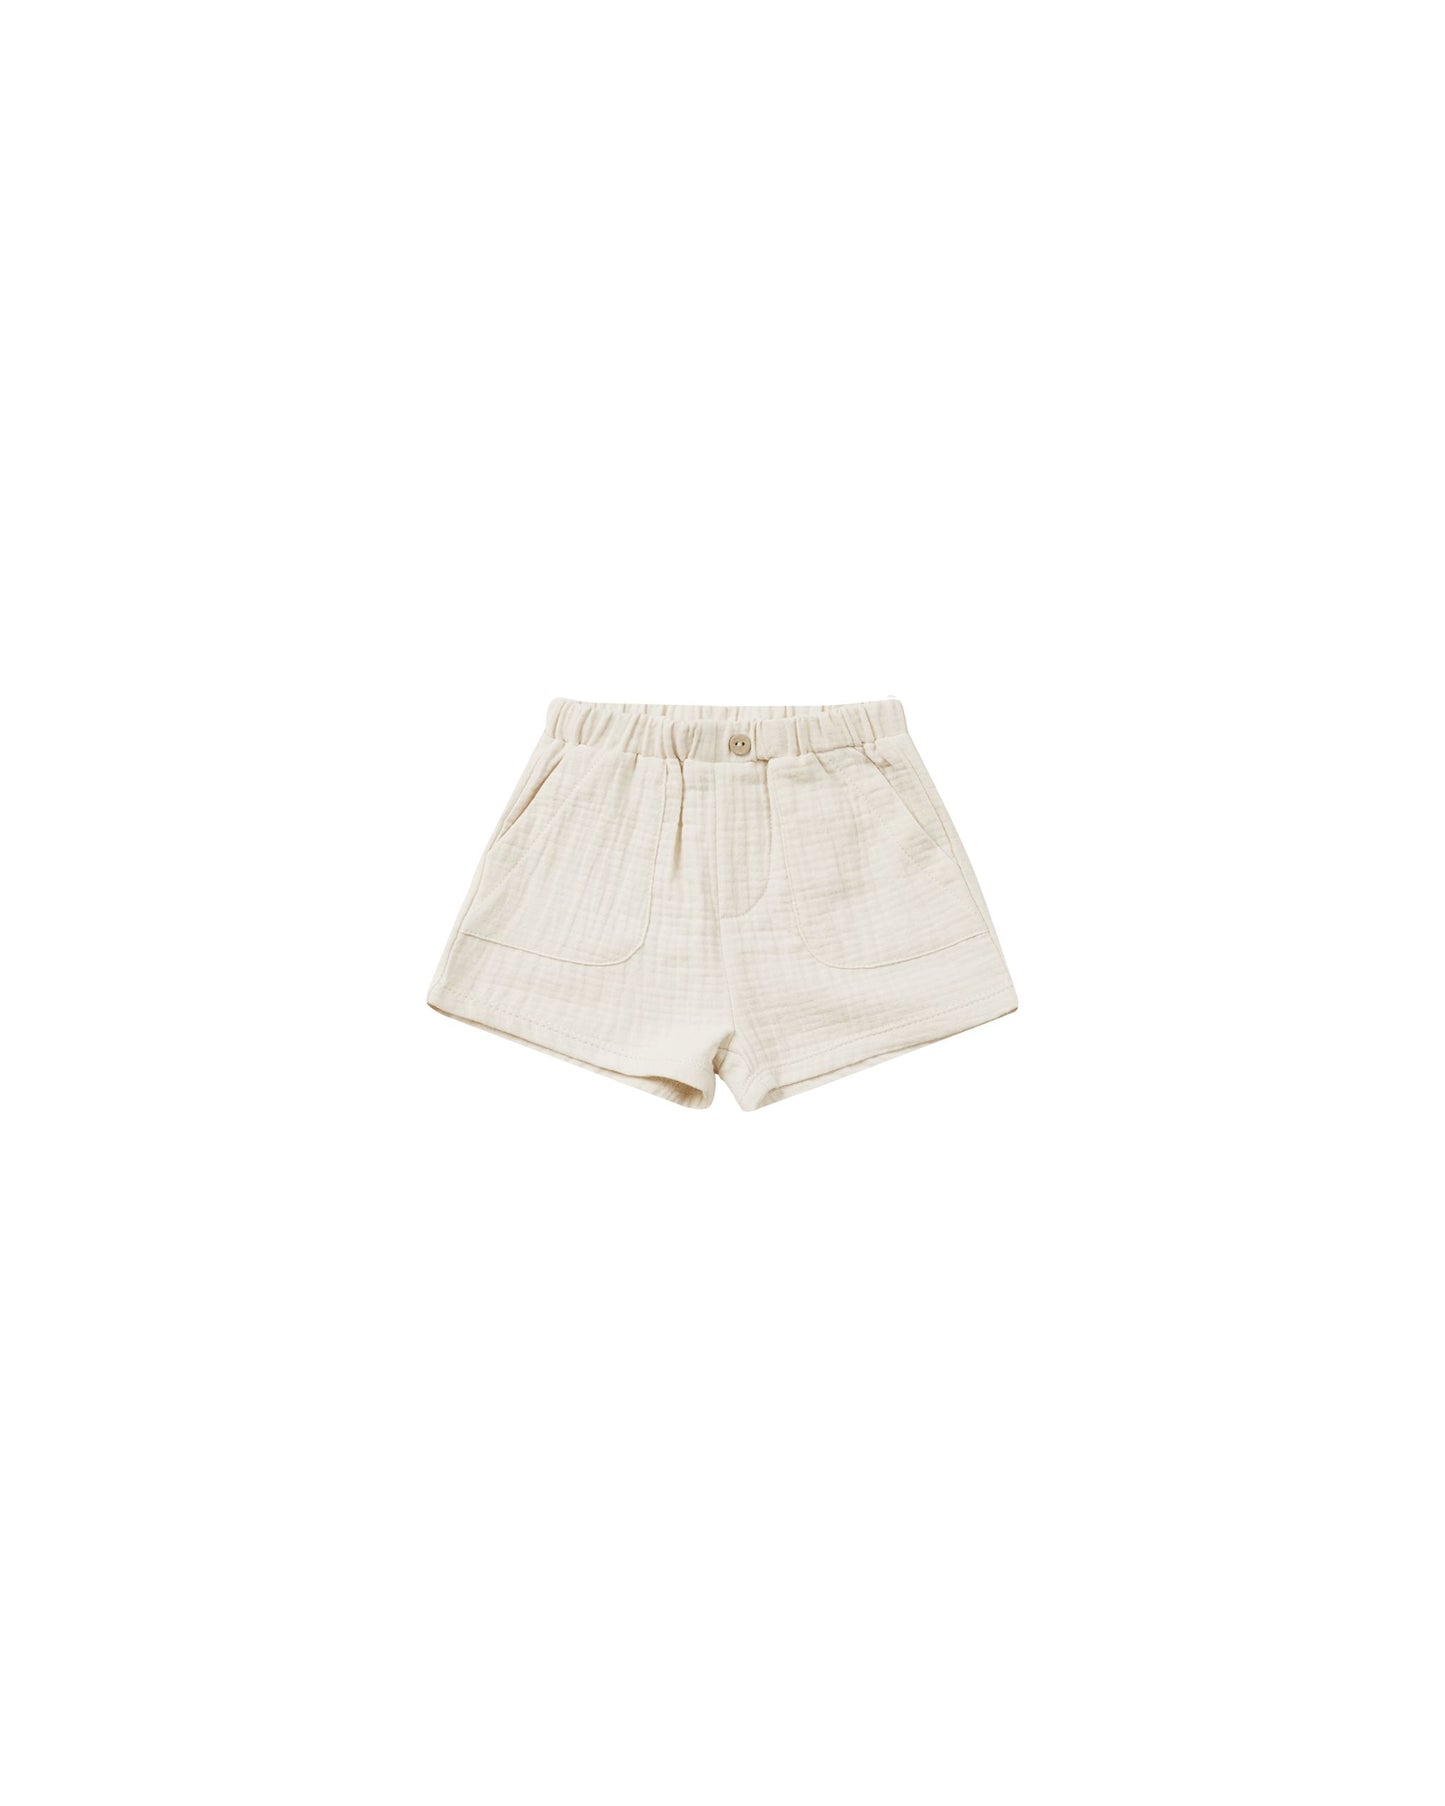 Quincy Mae Utility Short in Natural